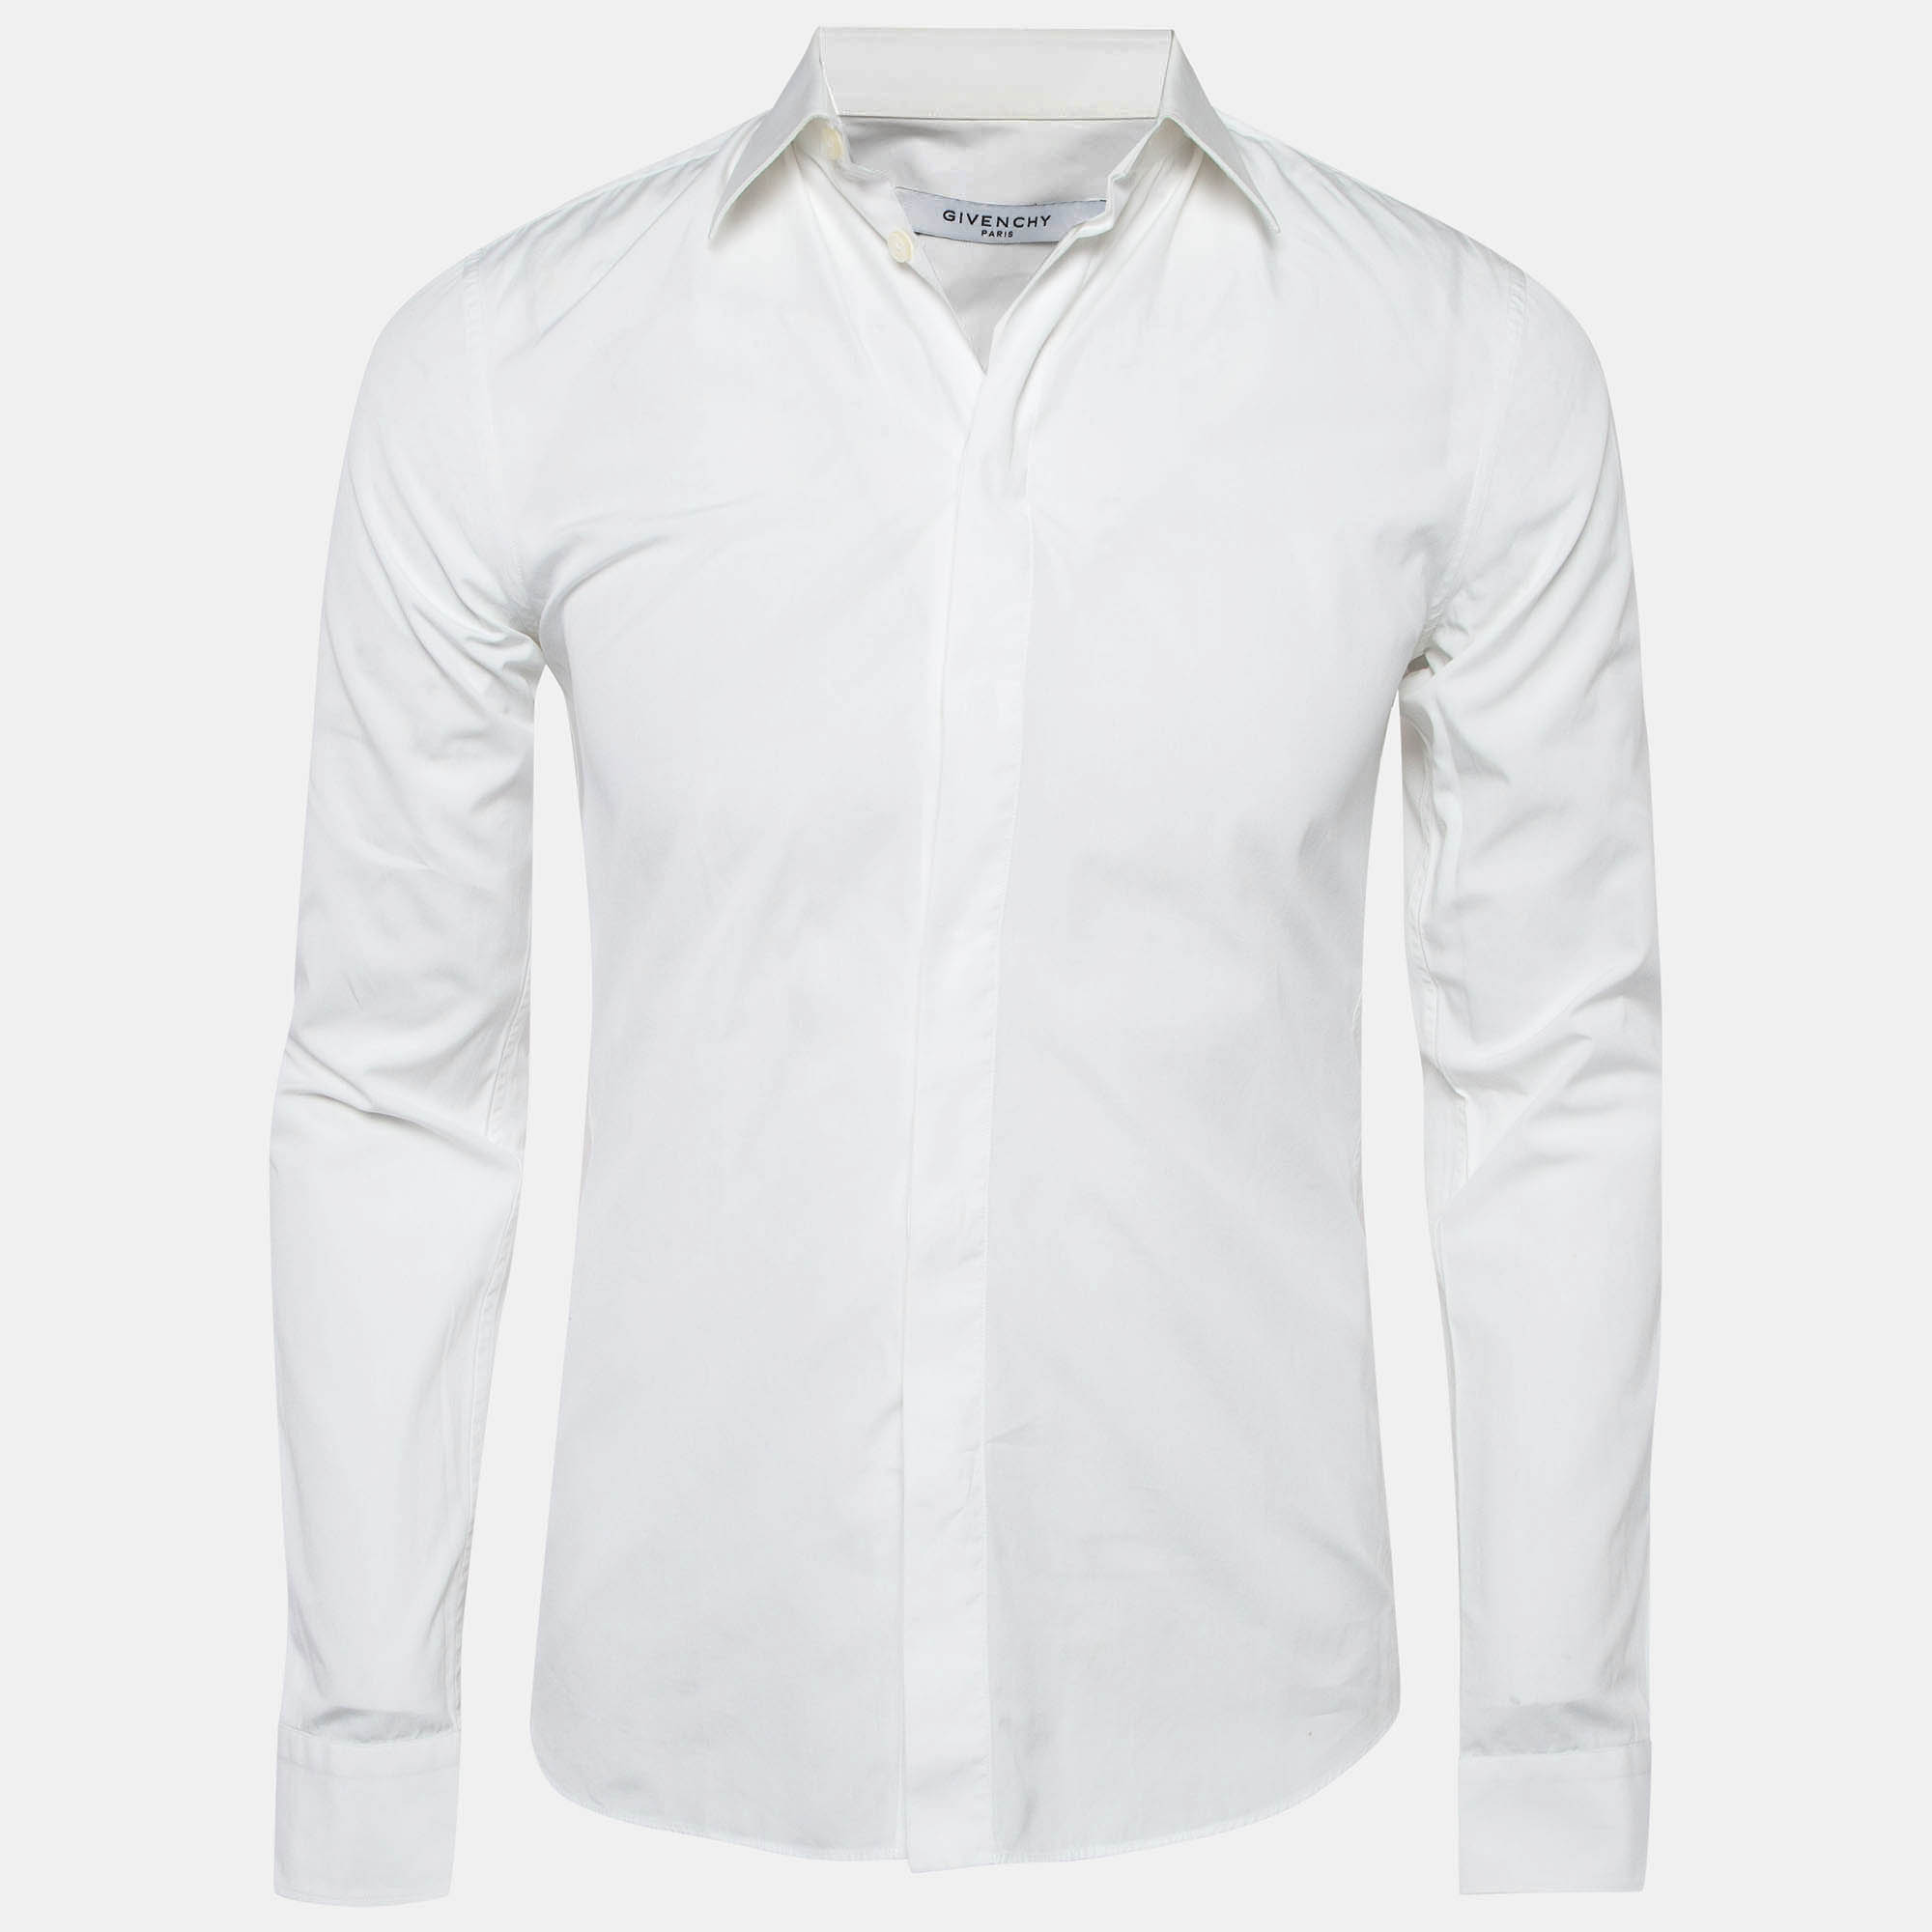 Givenchy white cotton long sleeve shirt s